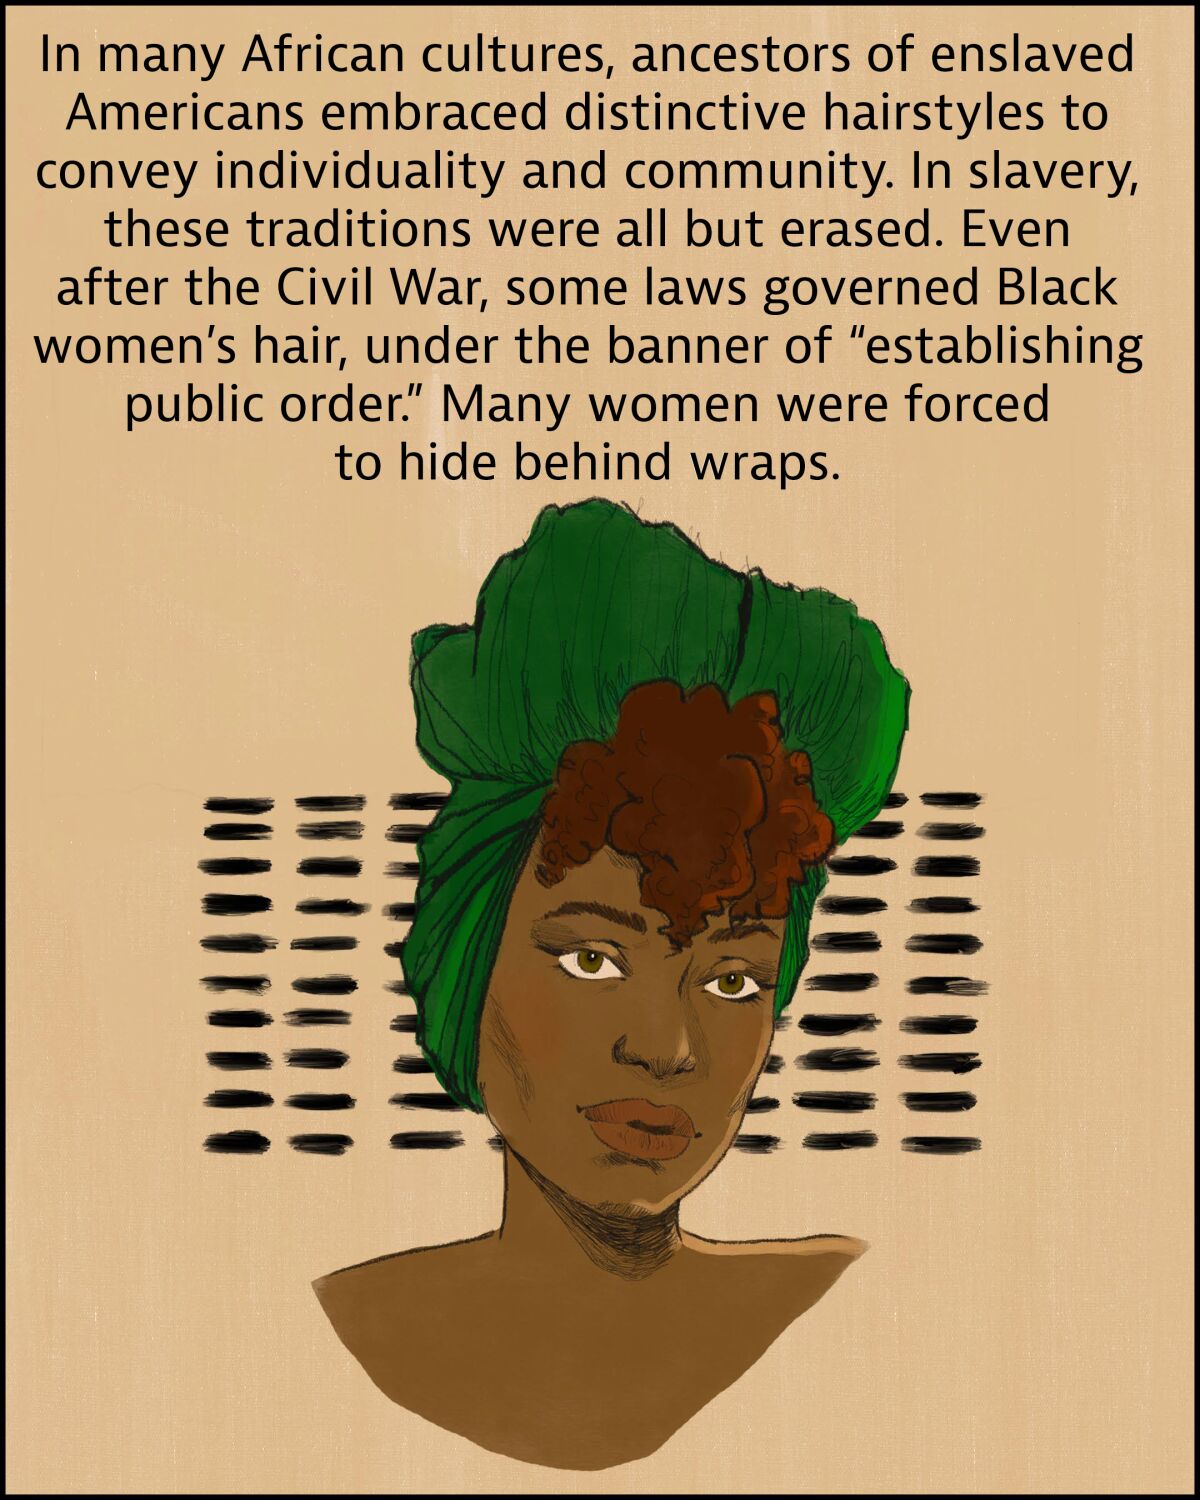 Ancestors of enslaved Americans embraced distinctive hairstyles. After Civil War many women were forced to hide behind wraps